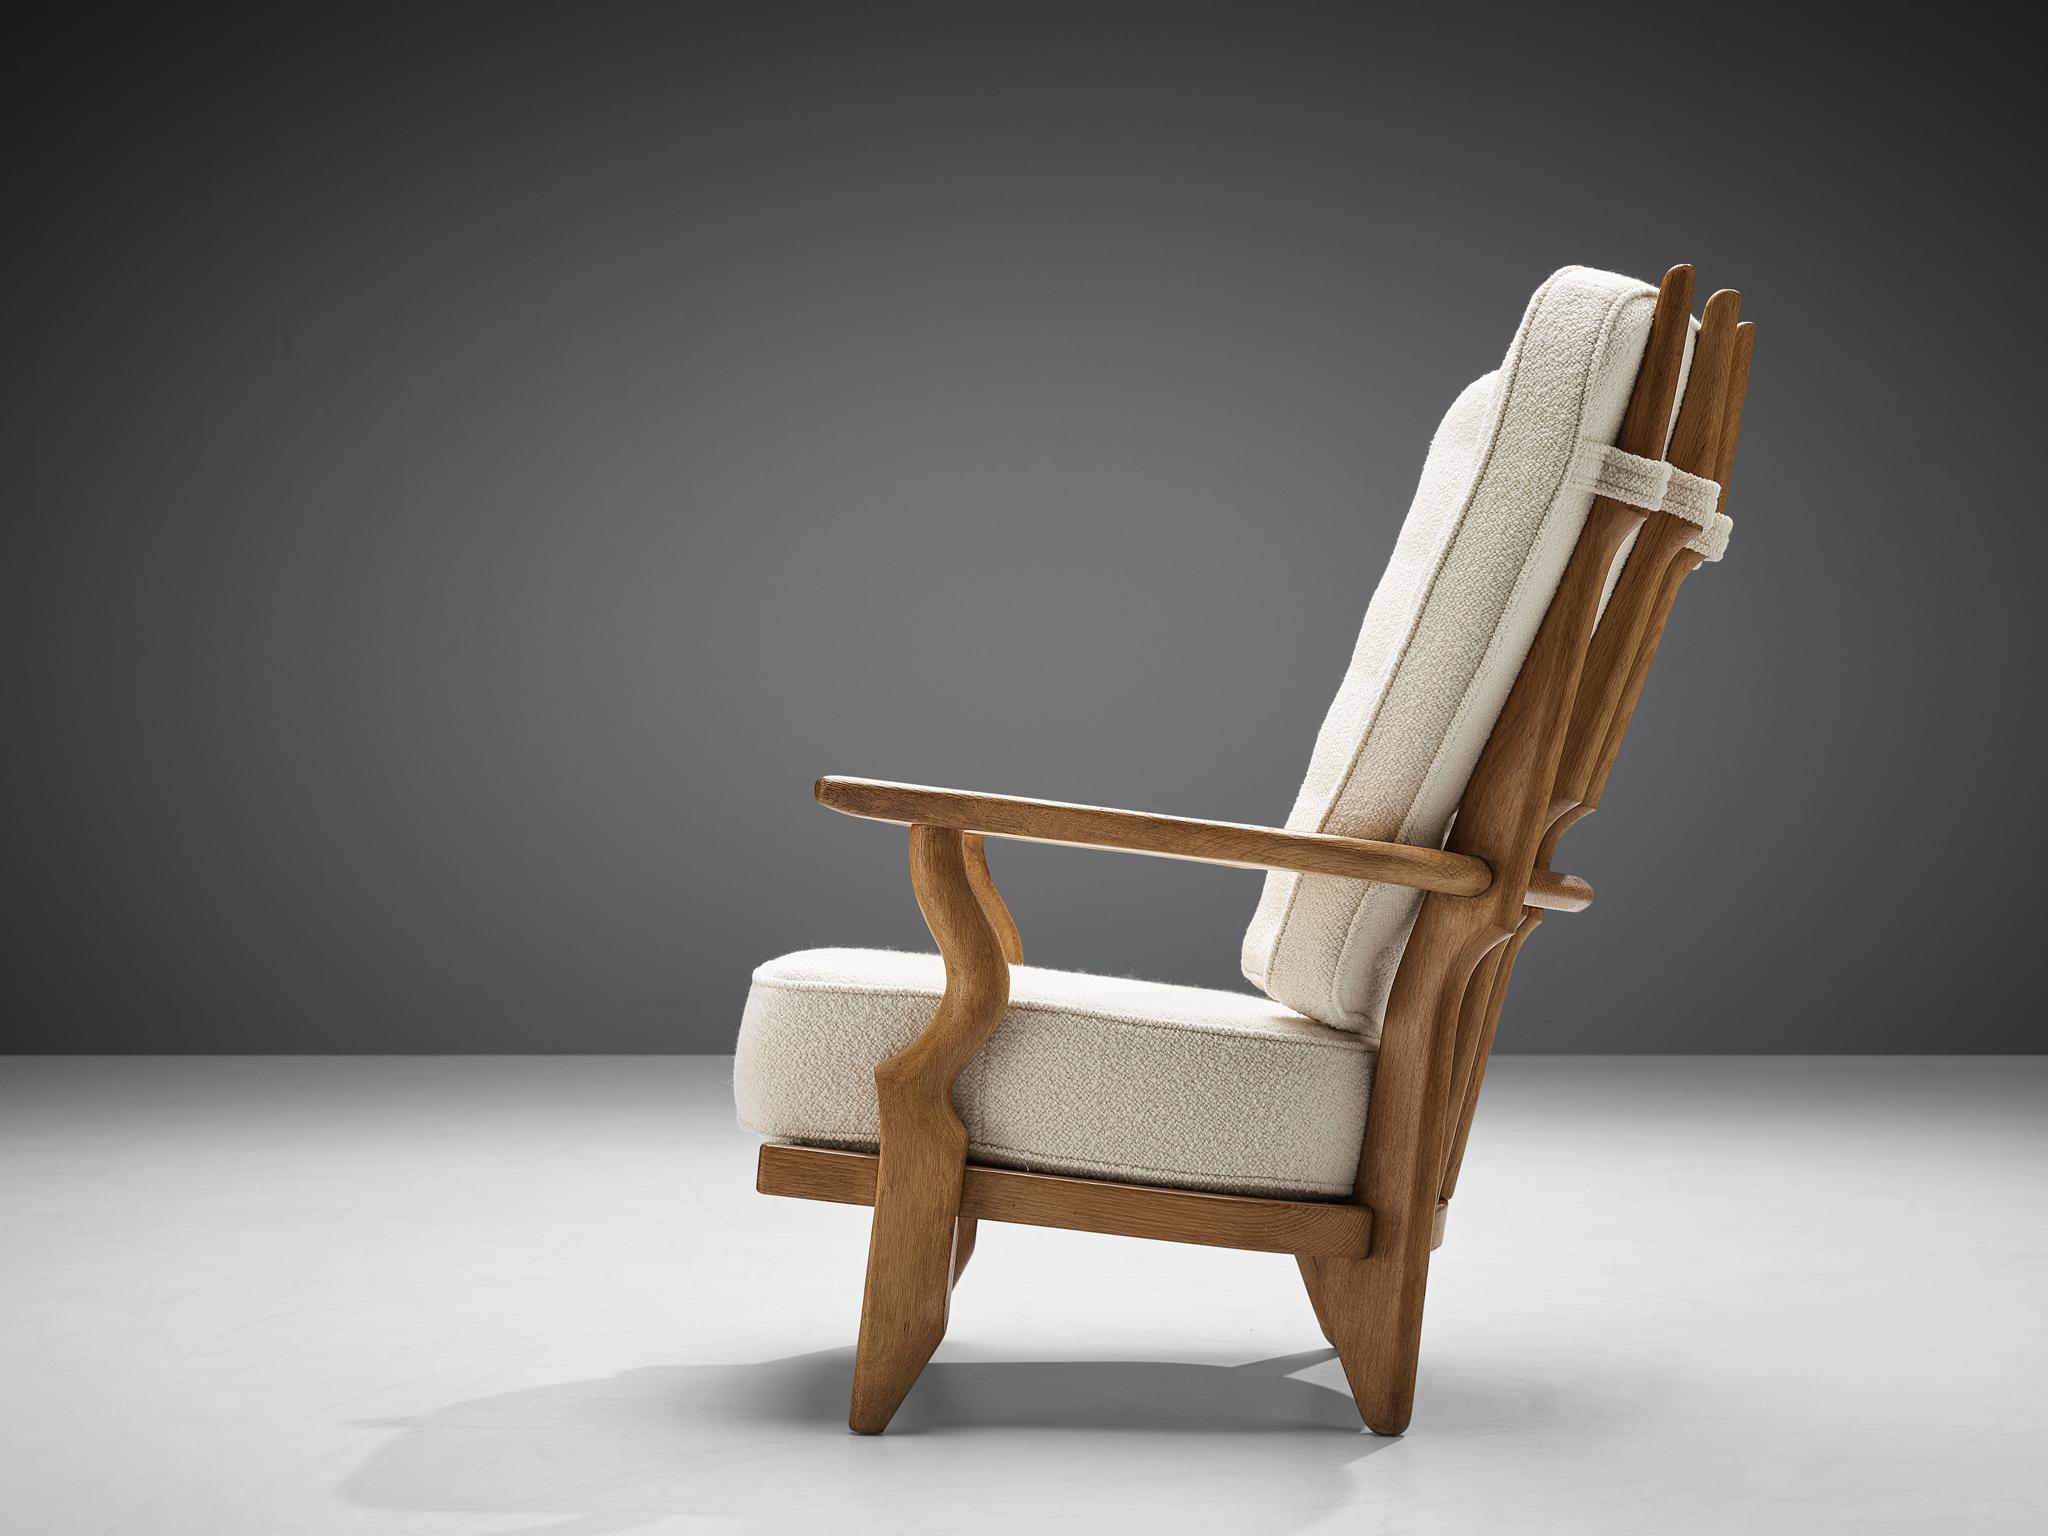 Guillerme & Chambron 'Grand Repos' Lounge Chair in Oak and White Upholstery  1